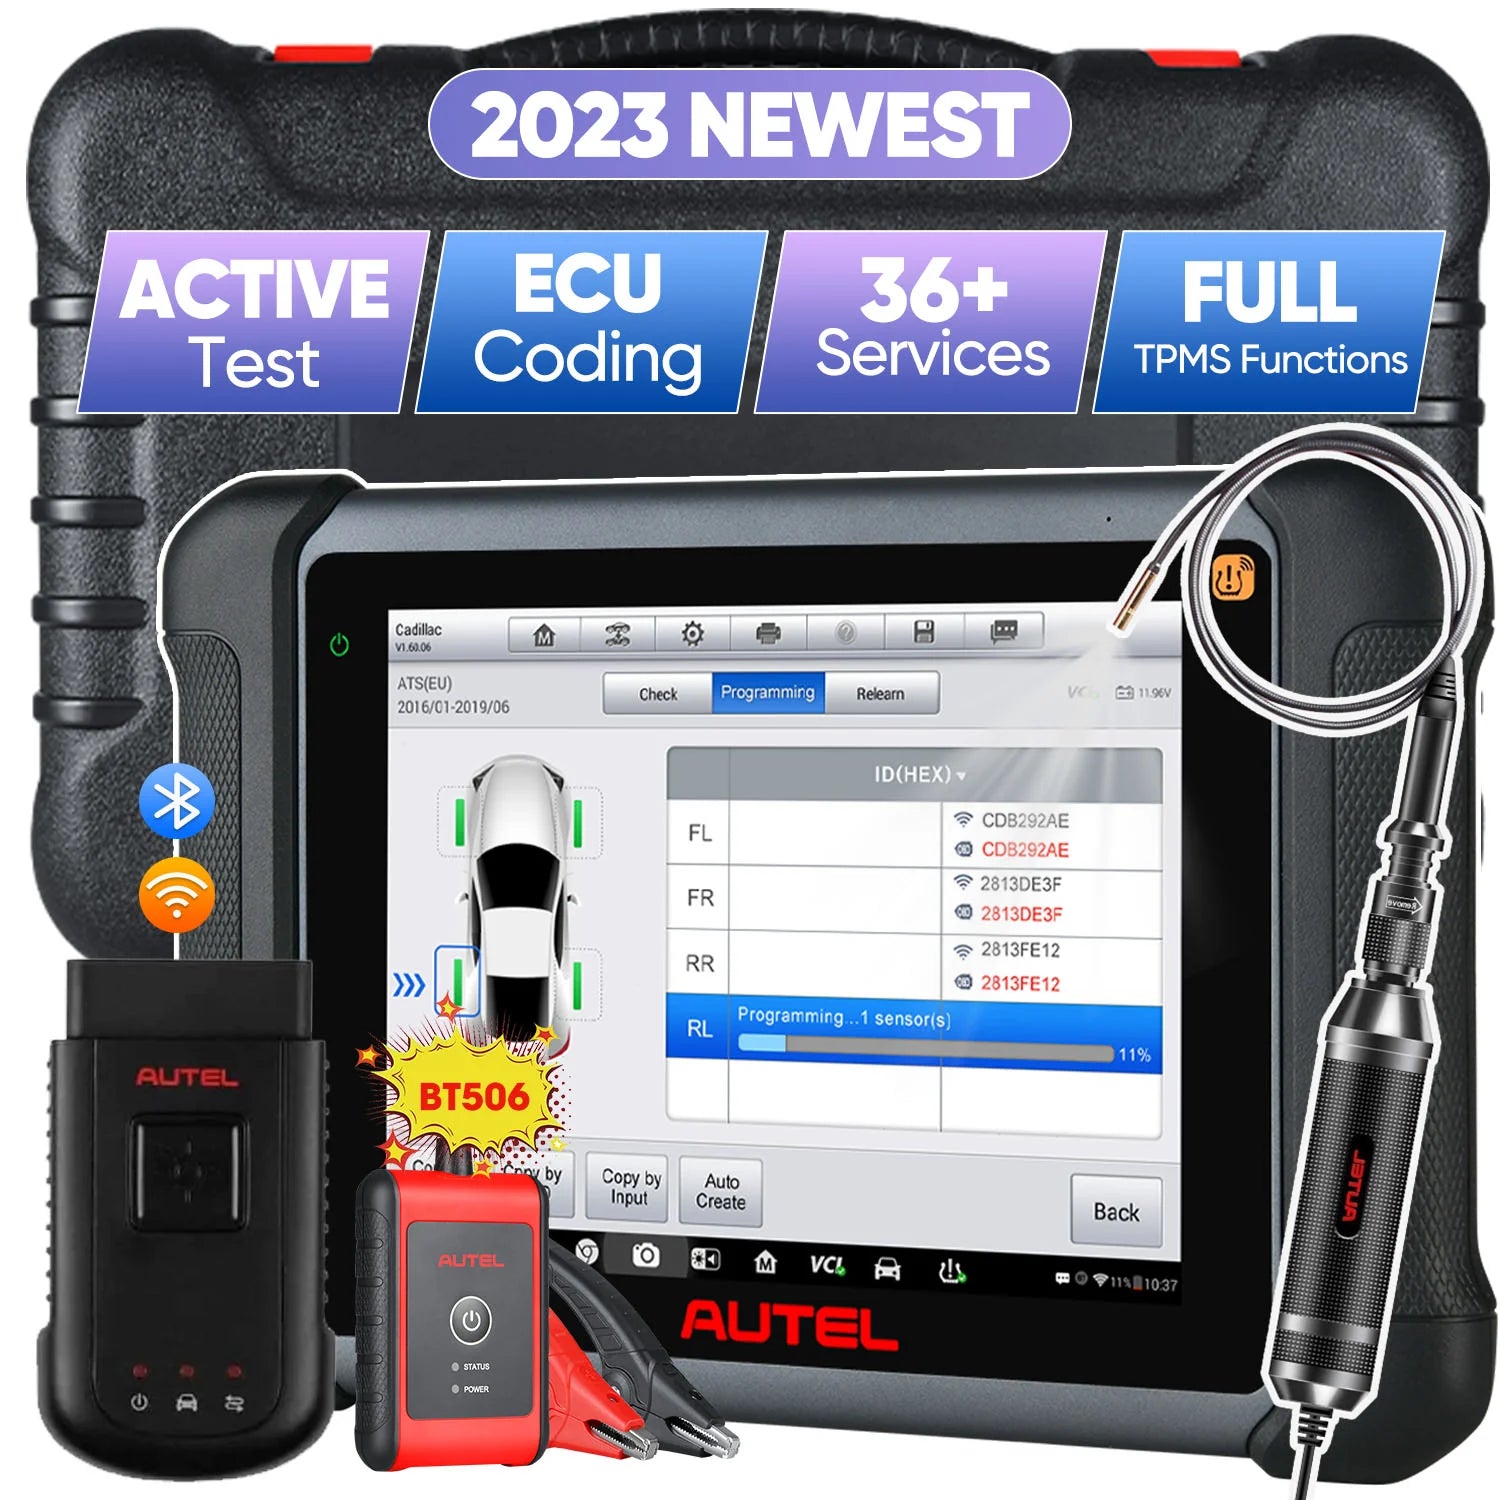 Autel Maxisys MS906TS Diagnostic Scanner Full Tpms functions and MV108S BT506